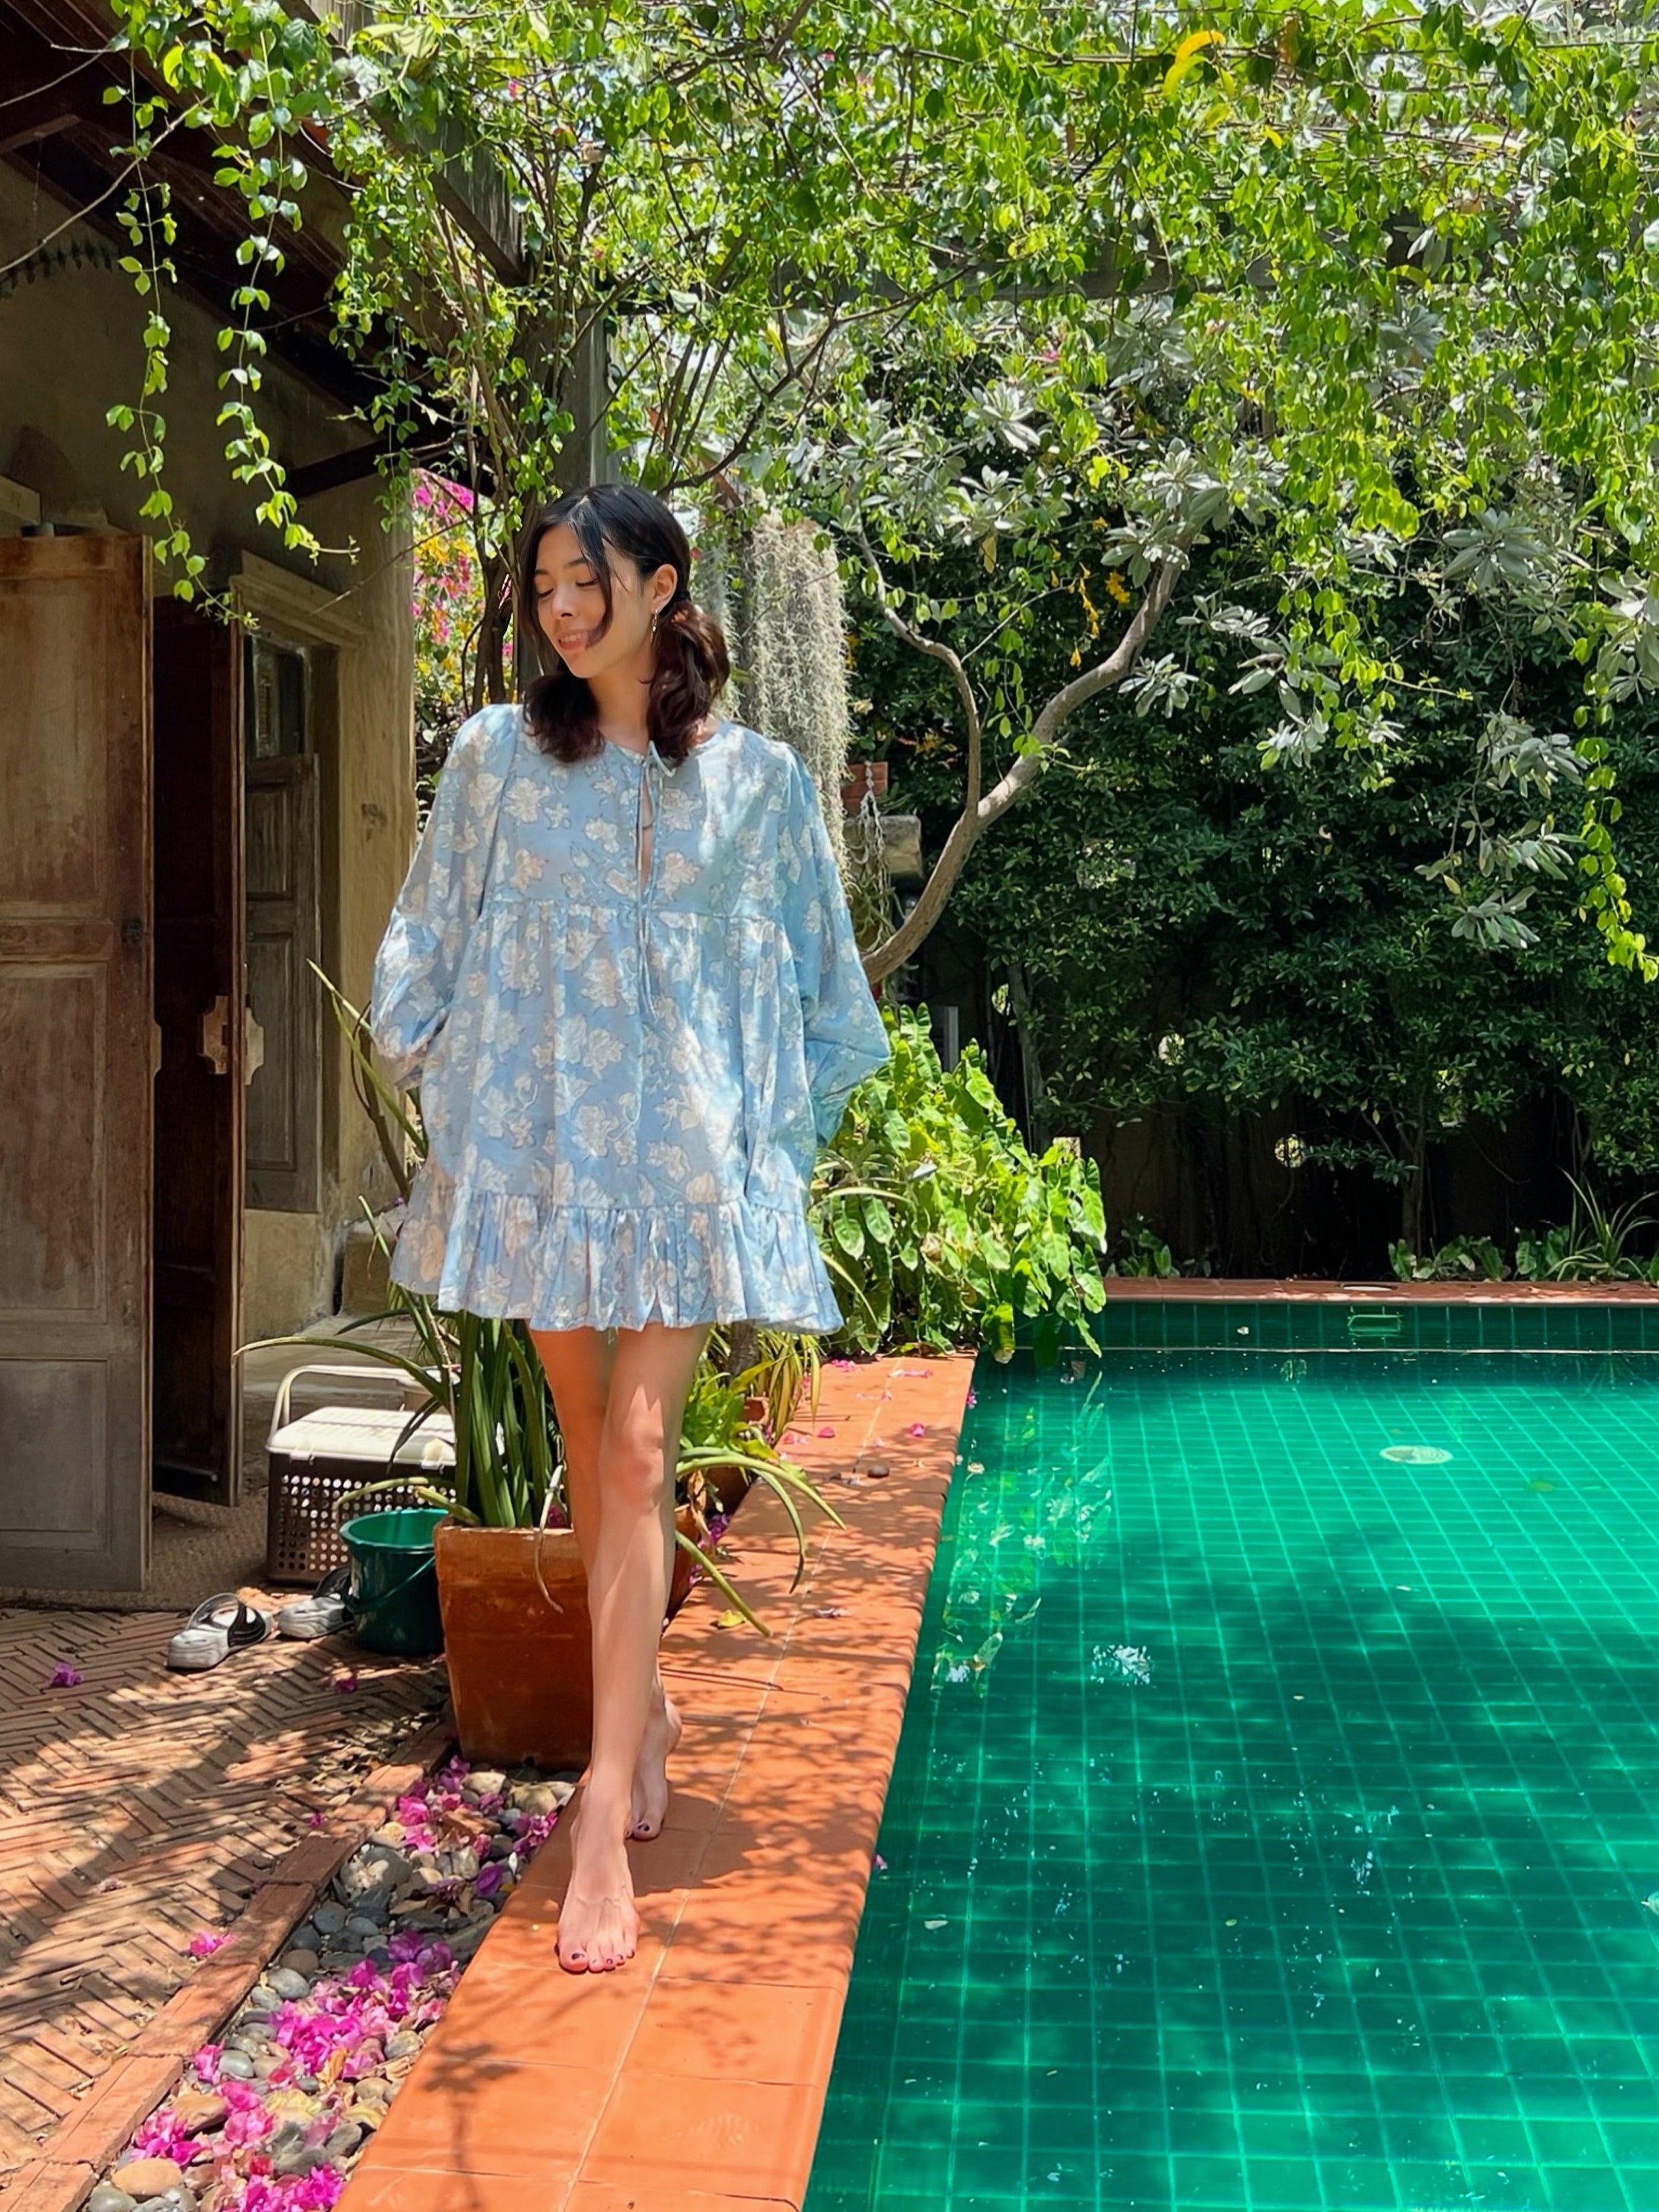 Coco de Chom Lola Bohemian Mini Dress in Beautiful Blue Sky - A Truly Unique Limited Edition Piece. Handcrafted with Wooden Blocks on Fine Cotton Voile, Showcasing a Dreamy Block Printed Pattern Inspired by Bougainvillea Flowers and Vacations. Ideal for Beach Days, Vacations, and Boho Enthusiasts.